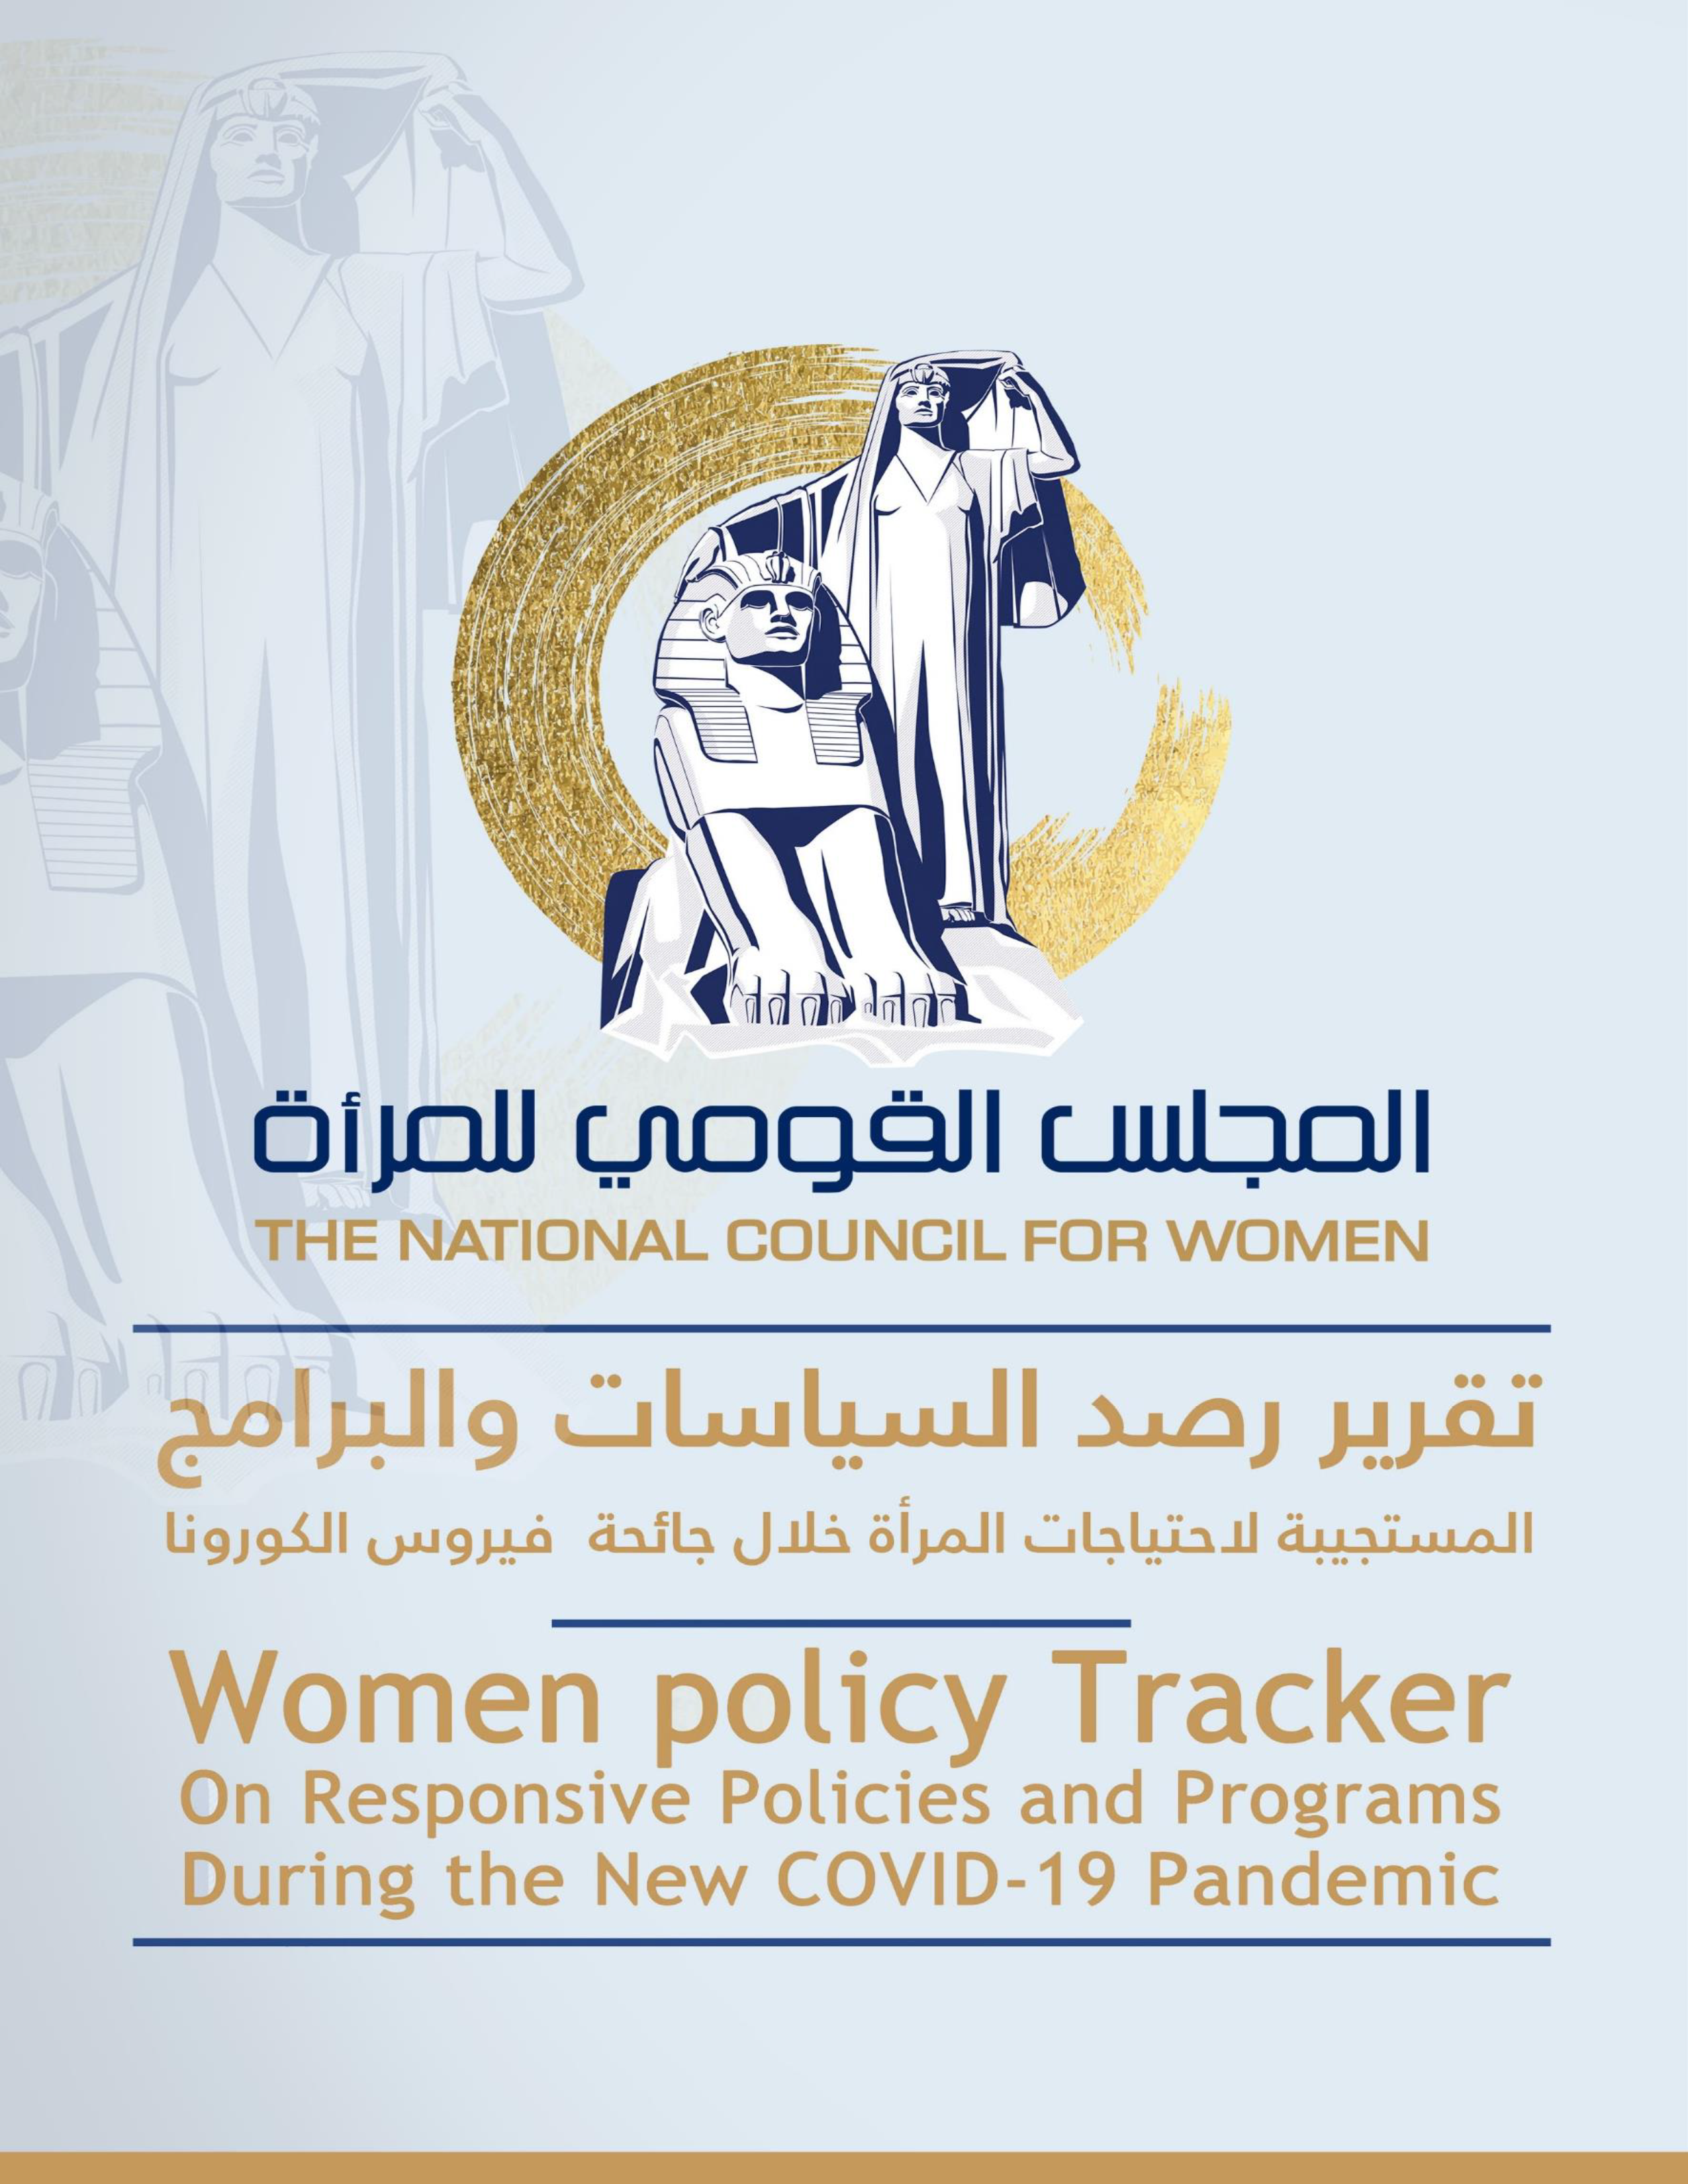 Fifth Edition Women policy Tracker on Responsive Policies and Programs during the New COVID-19 Pandemic